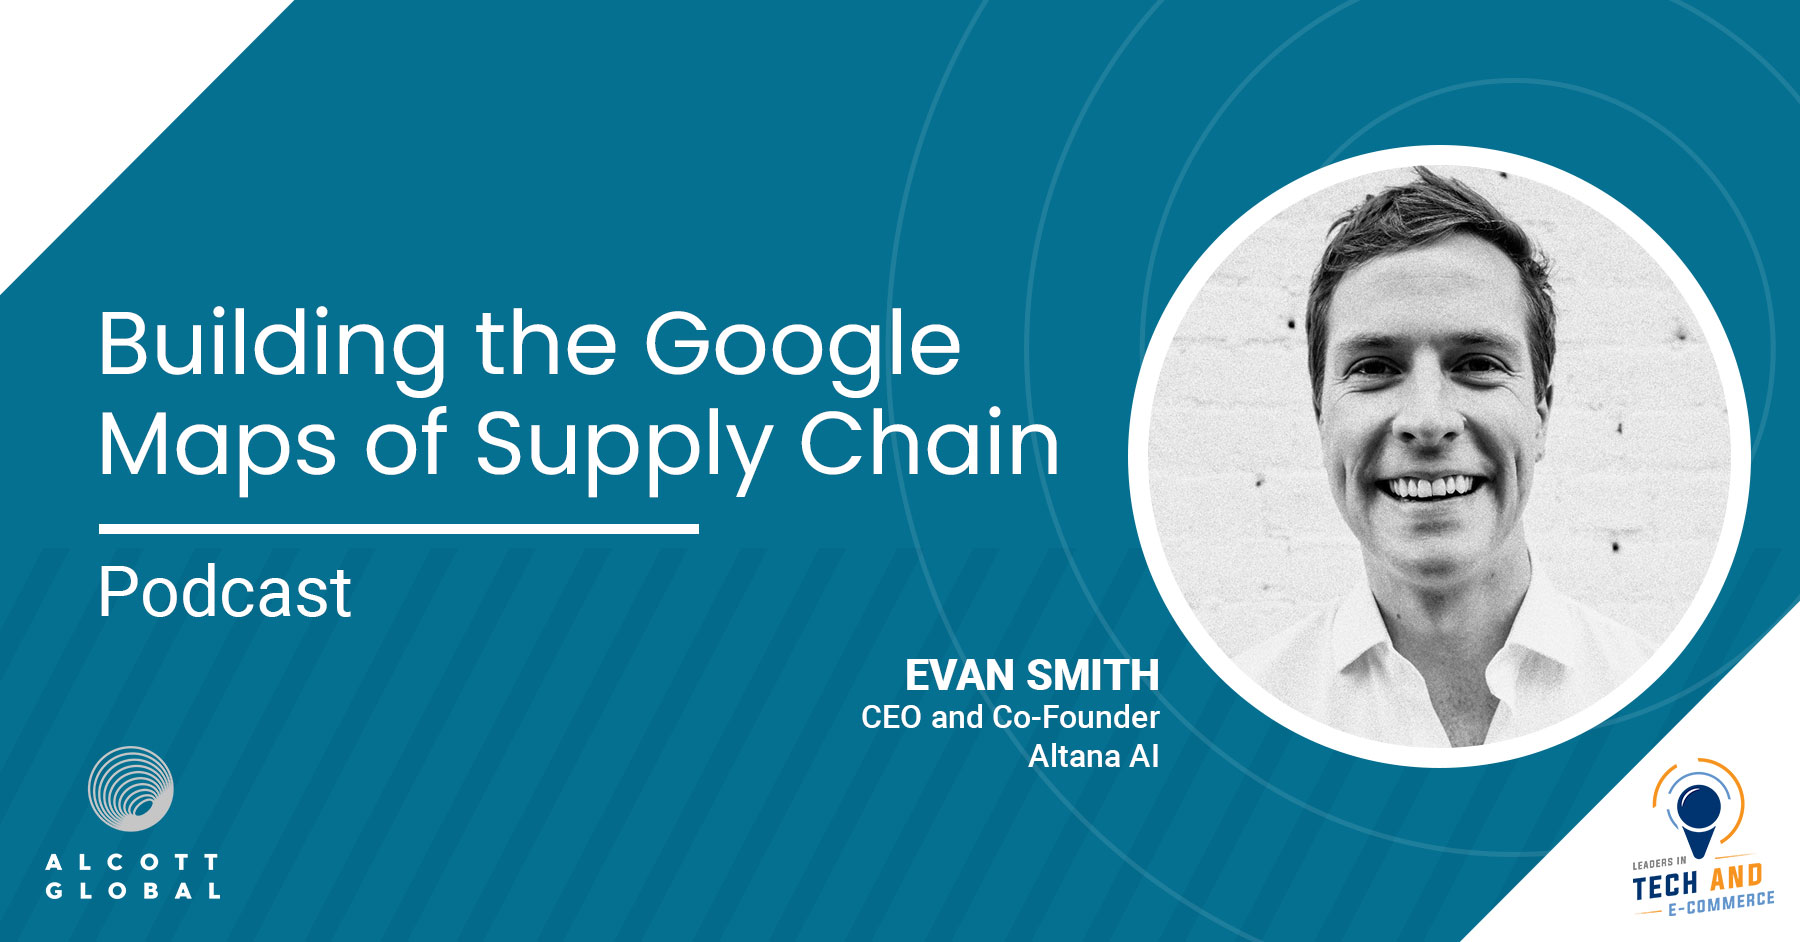 Building the Google Maps of Supply Chain with Evan Smith CEO & Co-Founder of Atlanta AI Featured Image